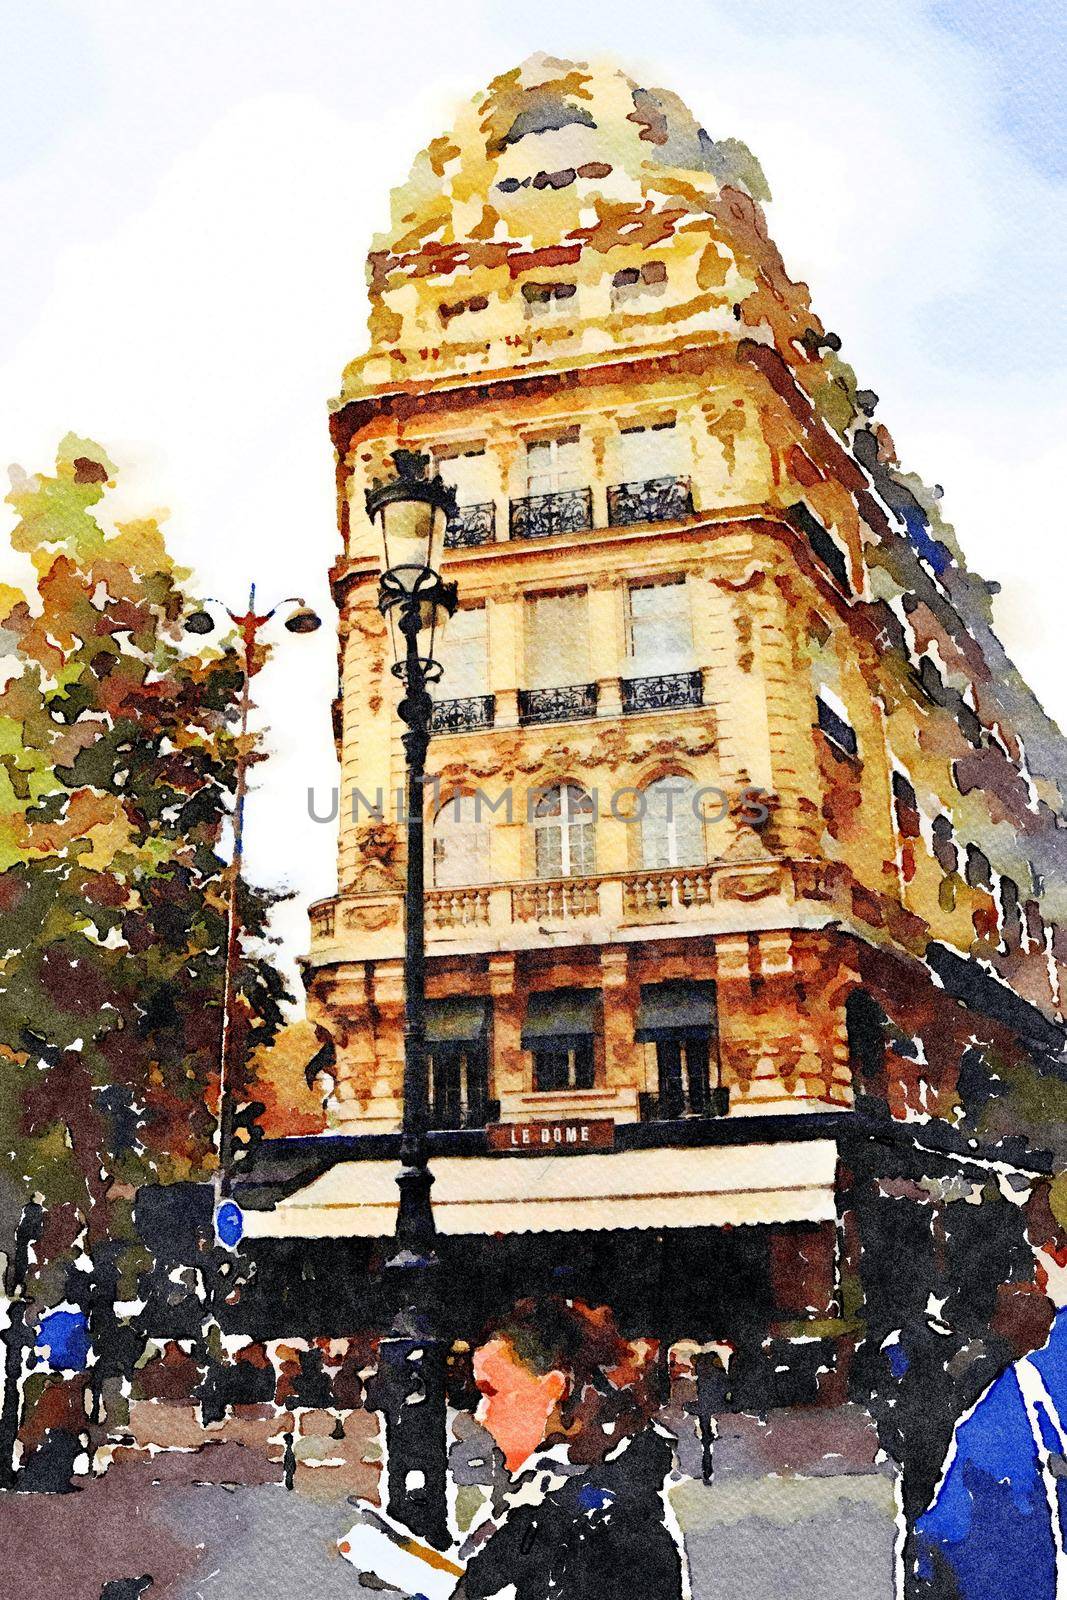 watercolor representing the facade of a historic building in the center of Paris